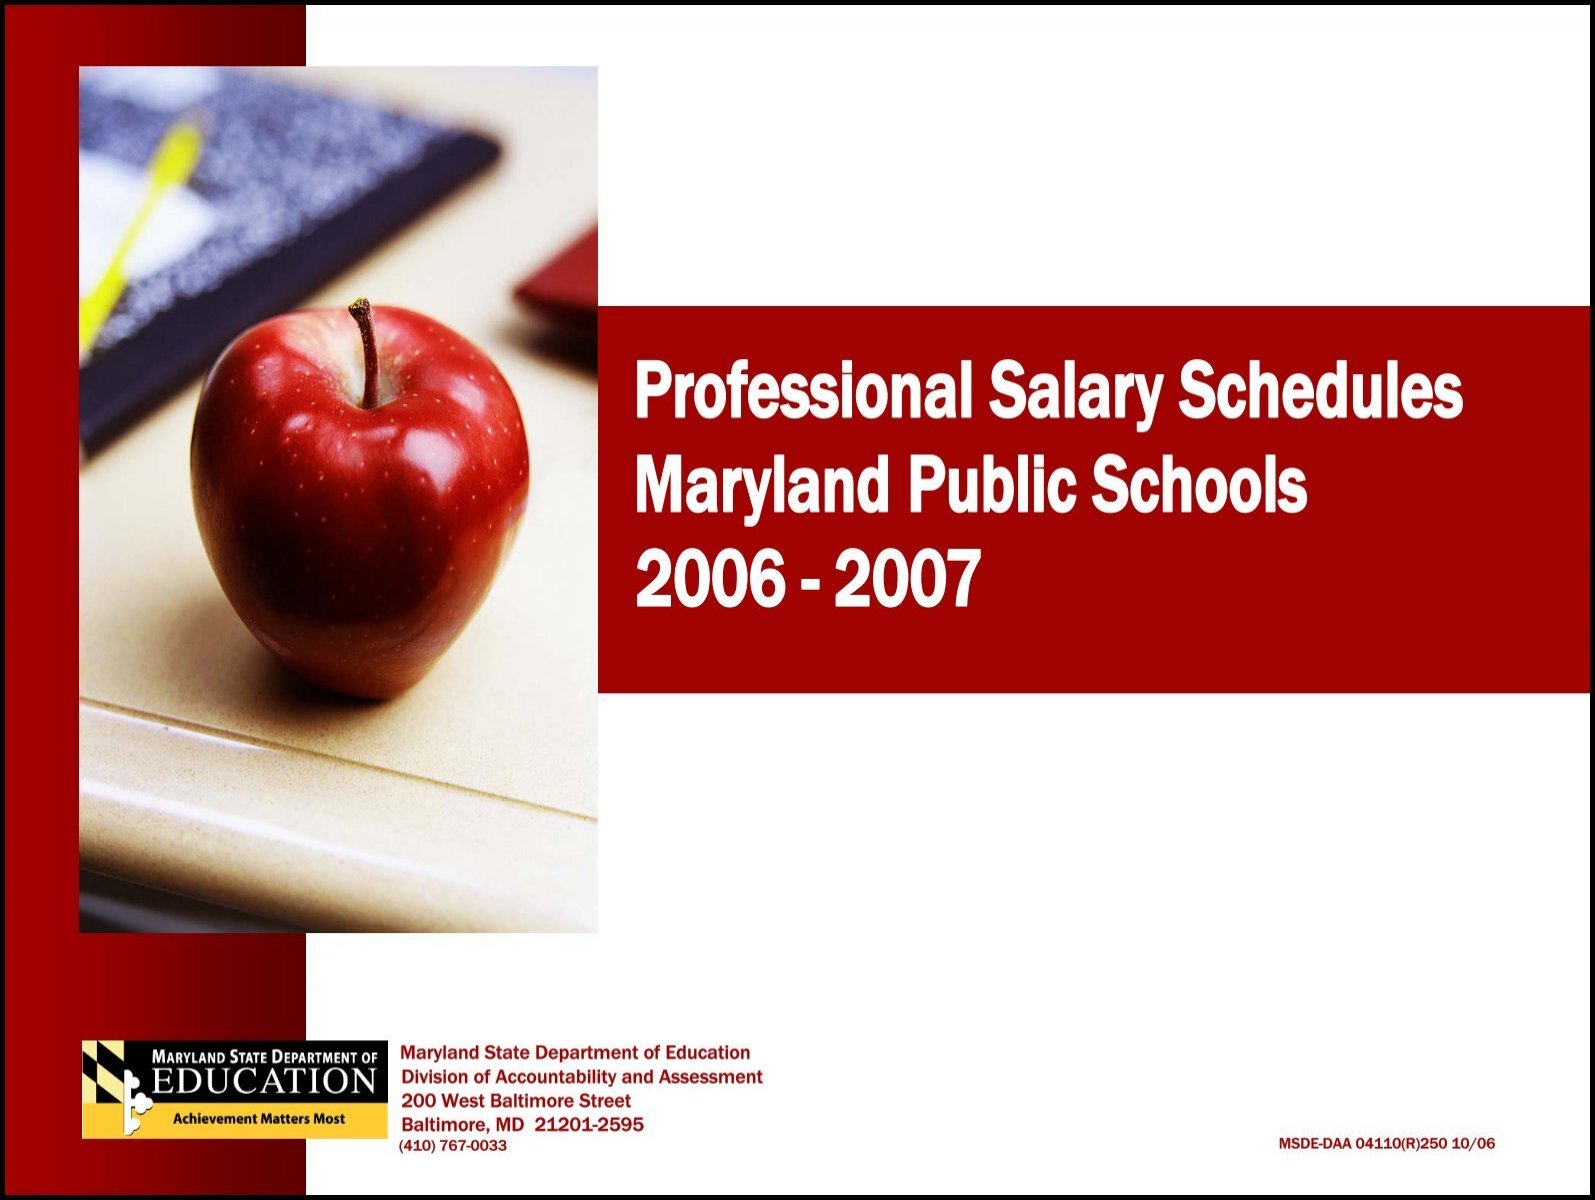 Professional Salary Schedules Maryland Public Schools